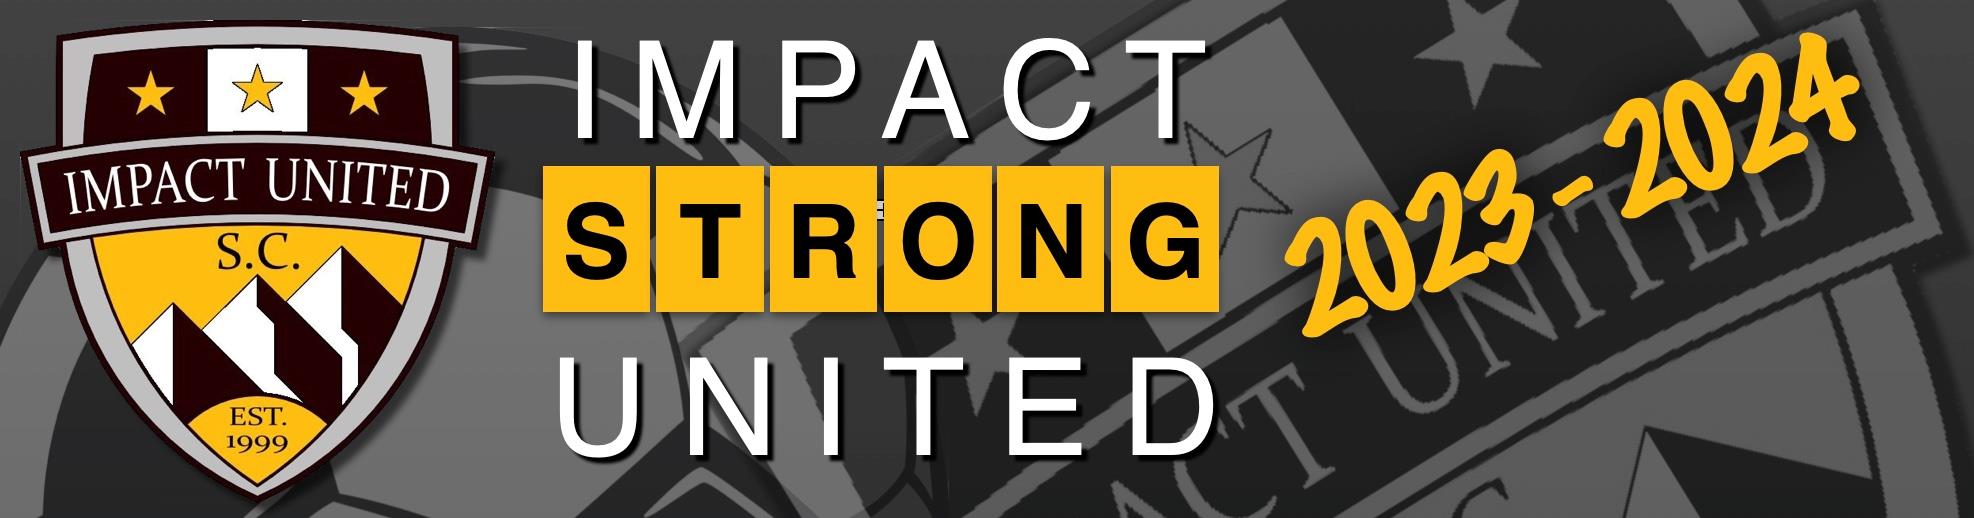 Impact United Competitive banner